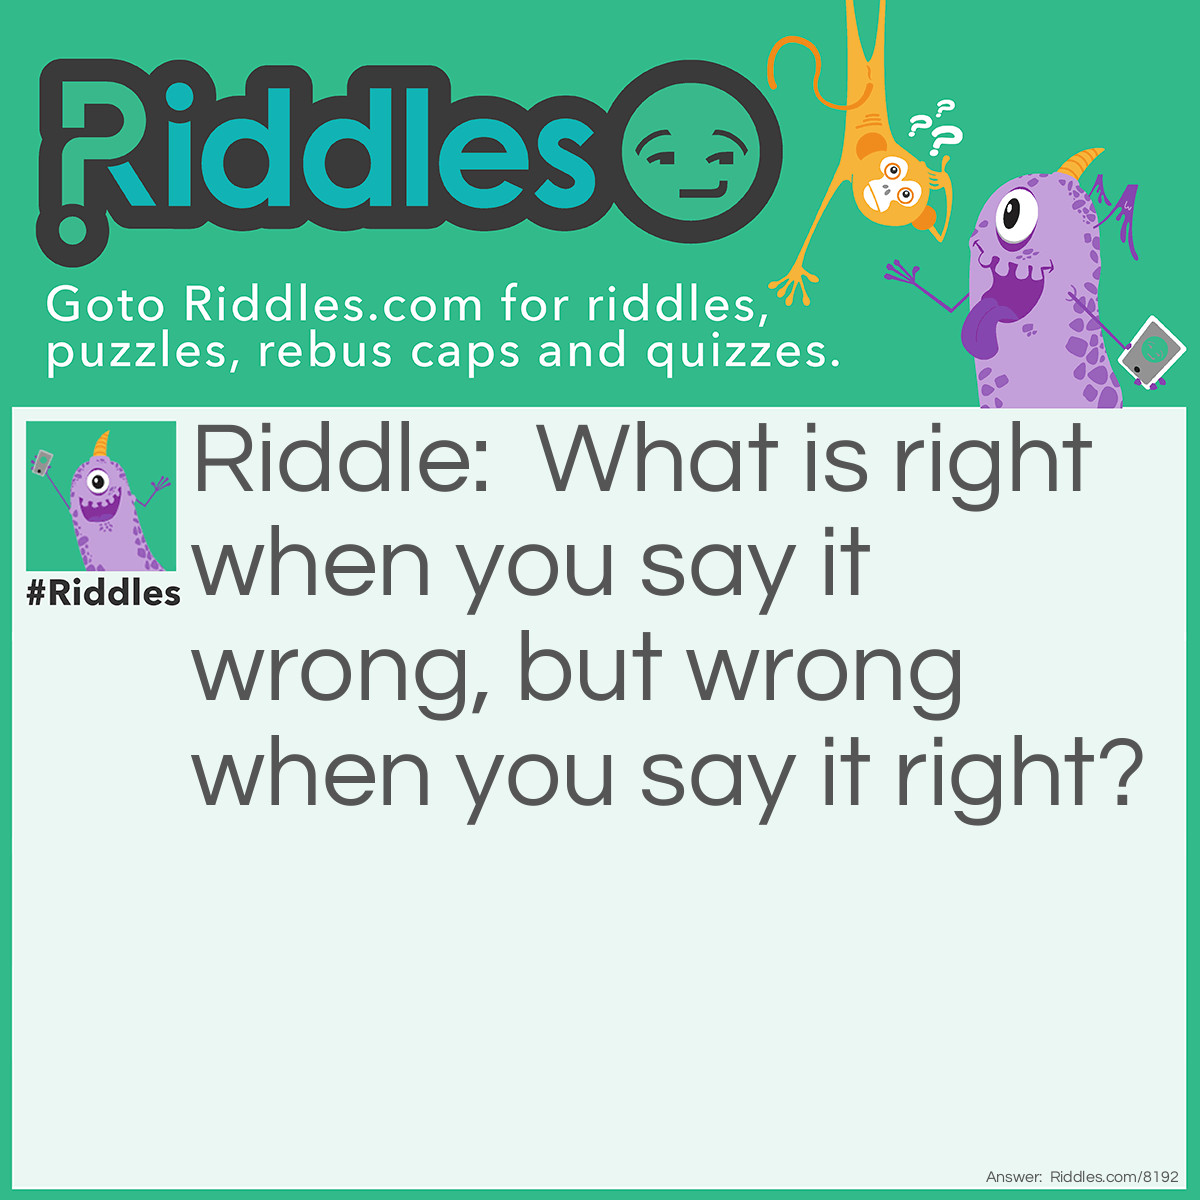 Riddle: What is right when you say it wrong, but wrong when you say it right? Answer: Wrong